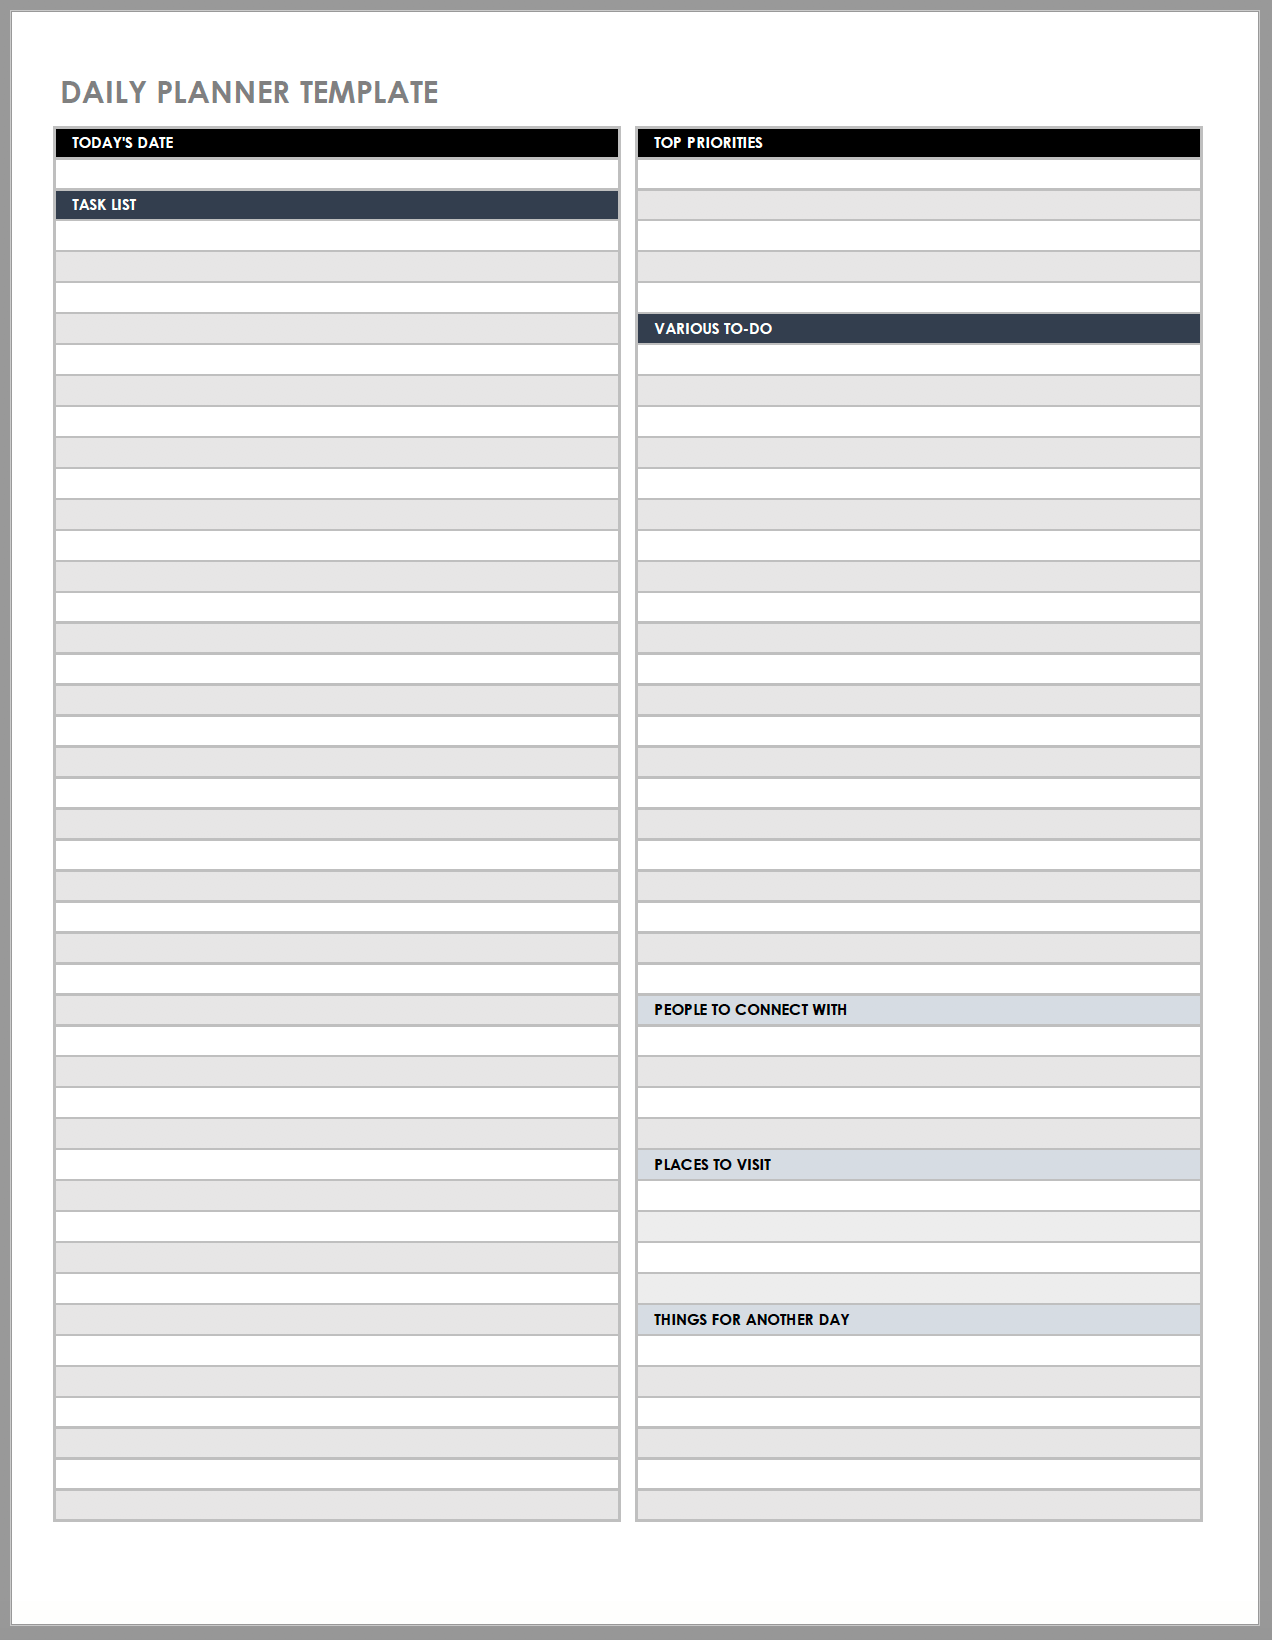 Free Daily Work Schedule Templates  Smartsheet With Regard To Daily Task List Template Word